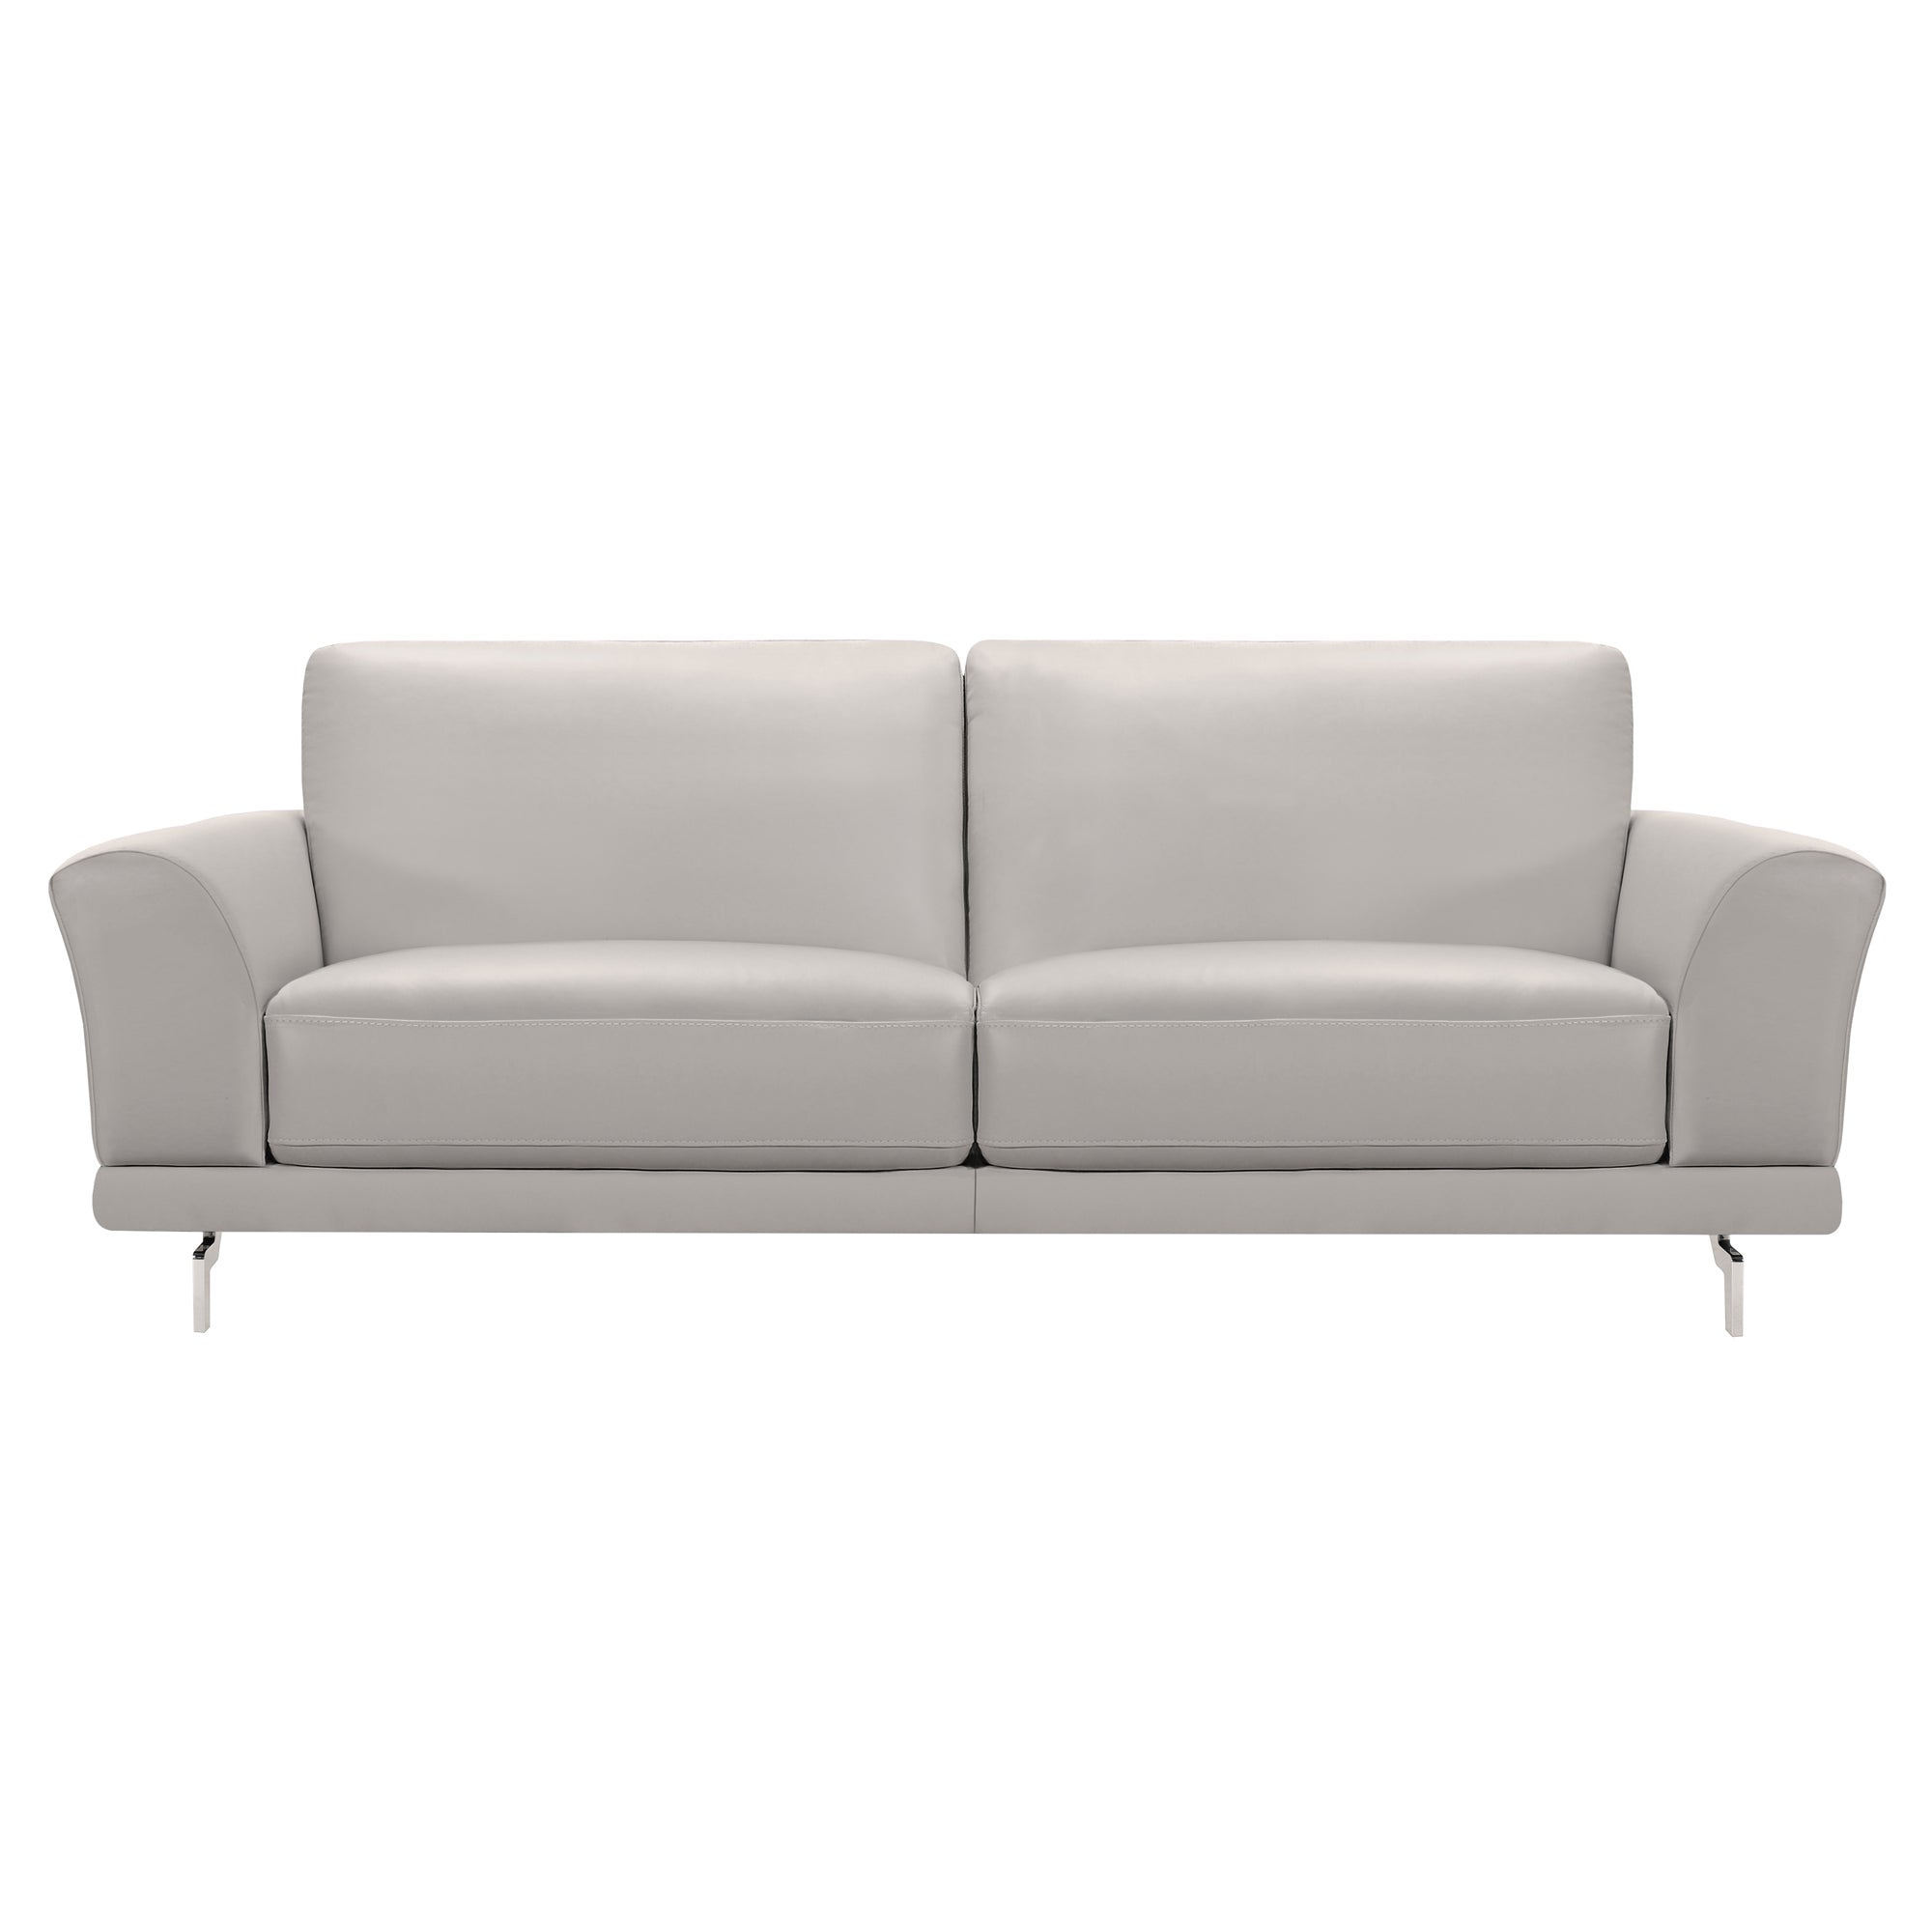 Armen Living Lcev3gr Everly Contemporary Sofa In Genuine Dove Grey Leather With Brushed Stainless Steel Legs